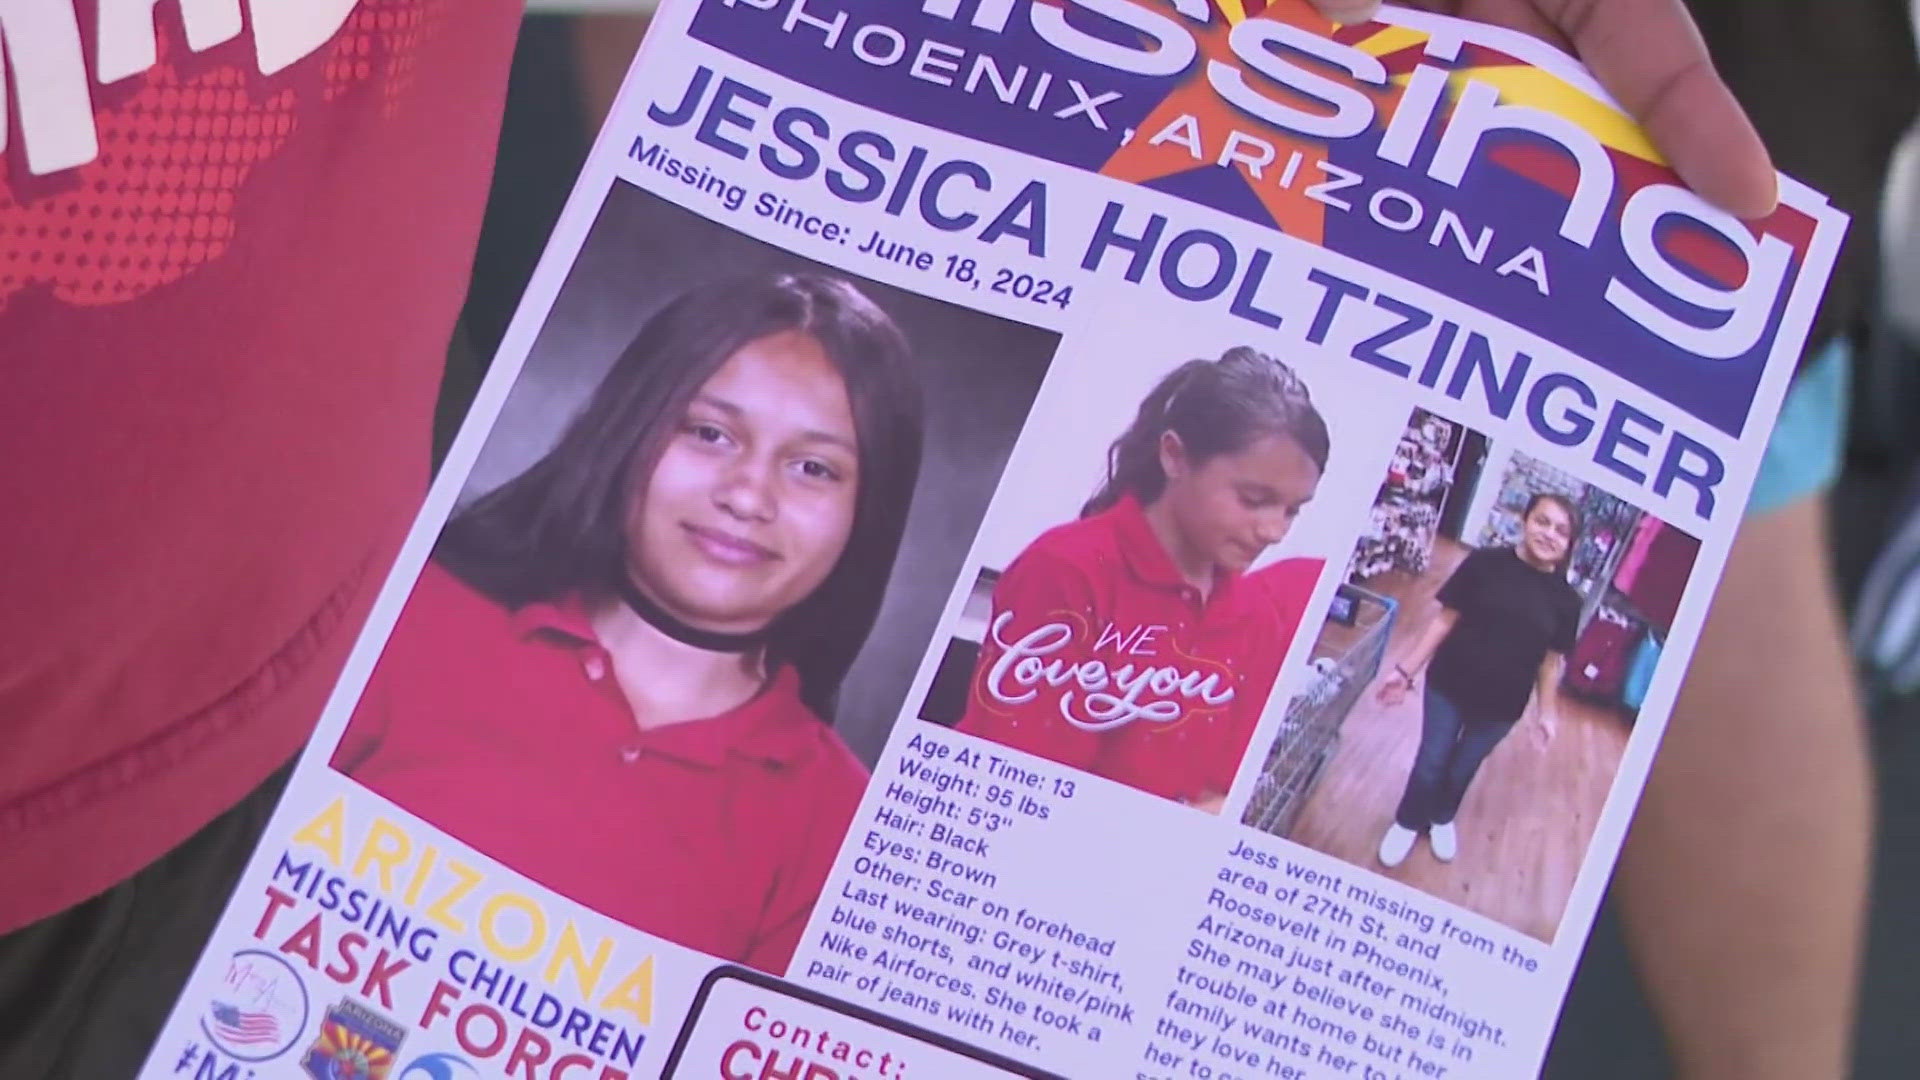 Jessica Holtzinger, 13, has been missing out of Phoenix for a month as her family continues to search for her.